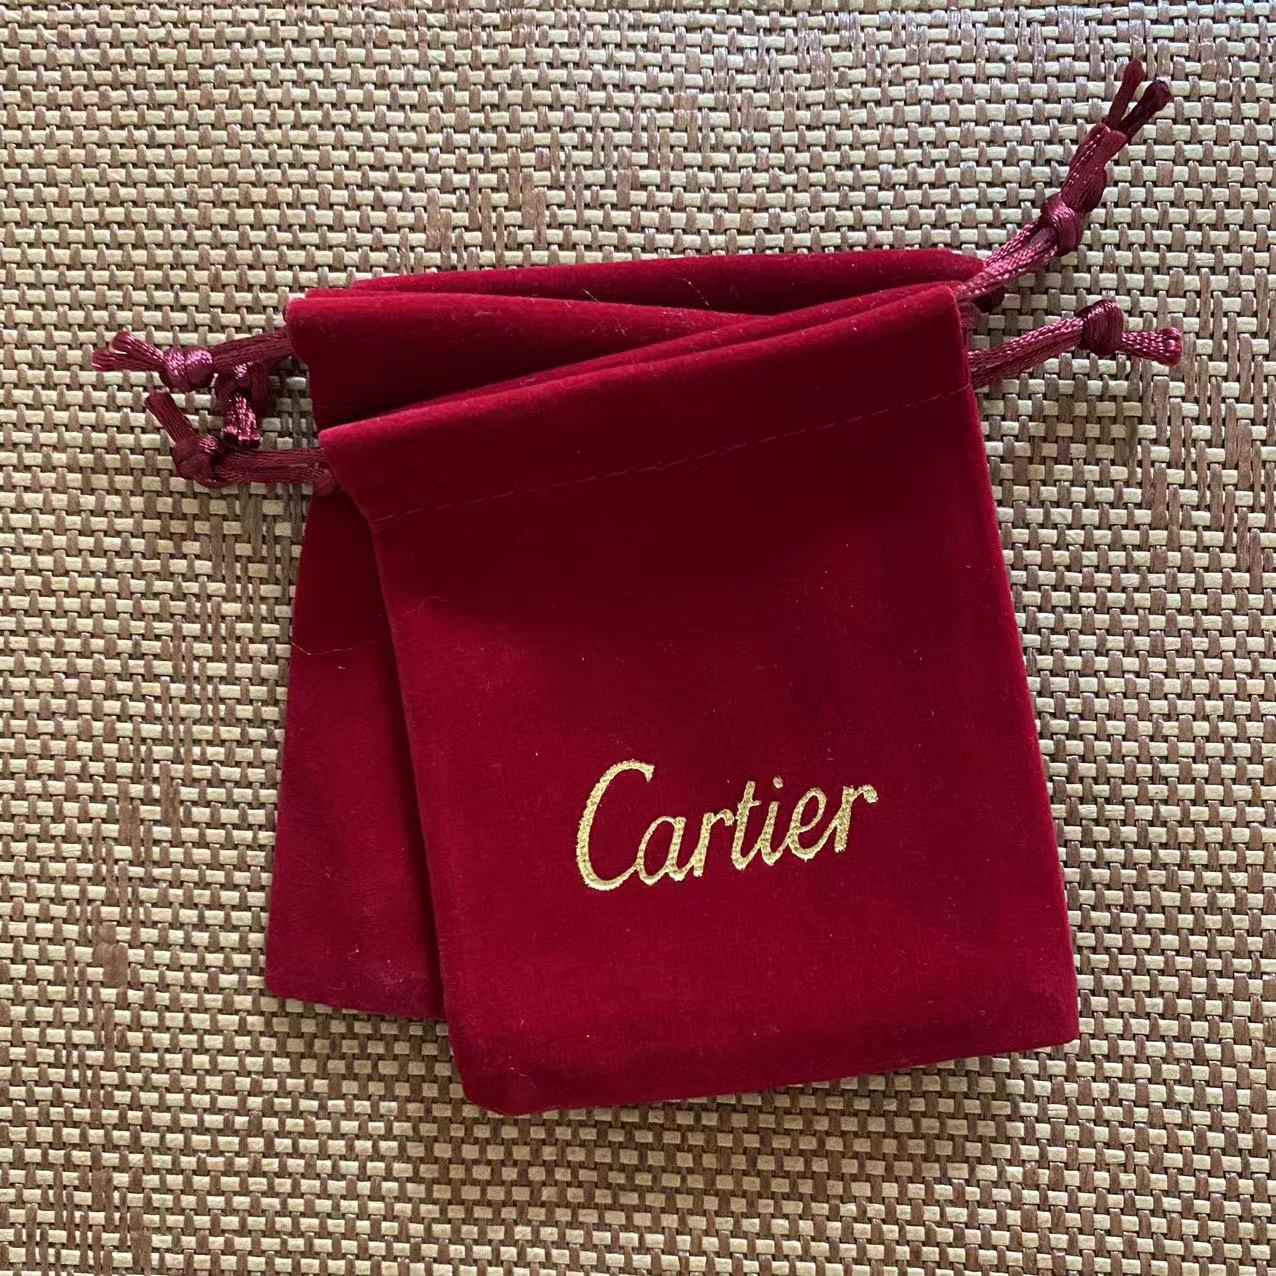 Cartier jewelry dust bag 1pc